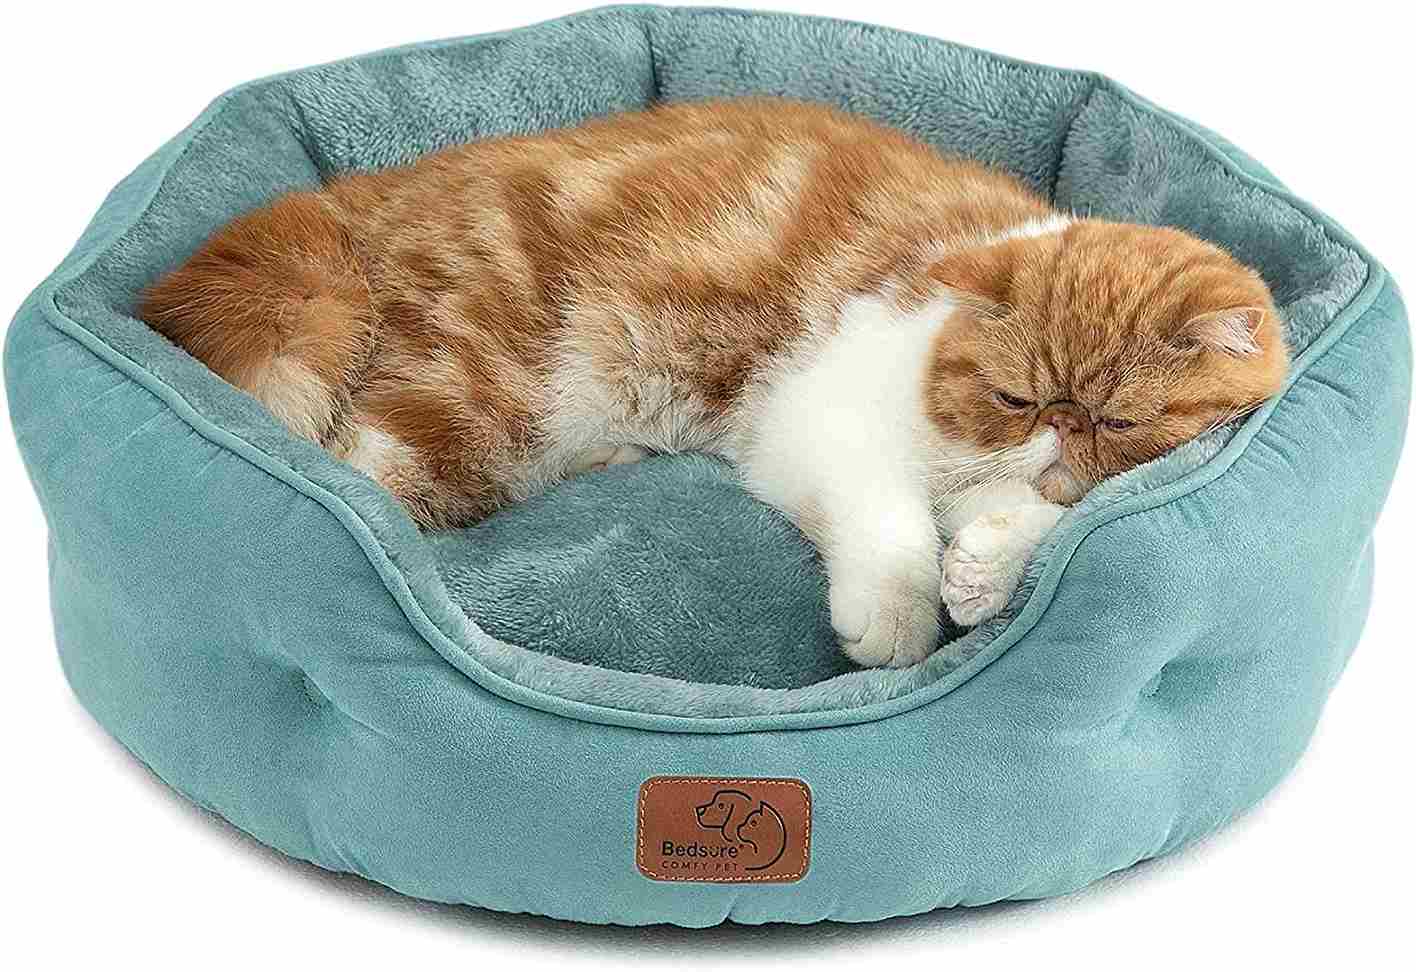 Bedsure Small Dog Bed for Small Dogs Washable - Round Cat Beds for Indoor Cats, Round Pet Bed for Puppy and Kitten with Slip-Resistant Bottom, Blue, 20 Inches